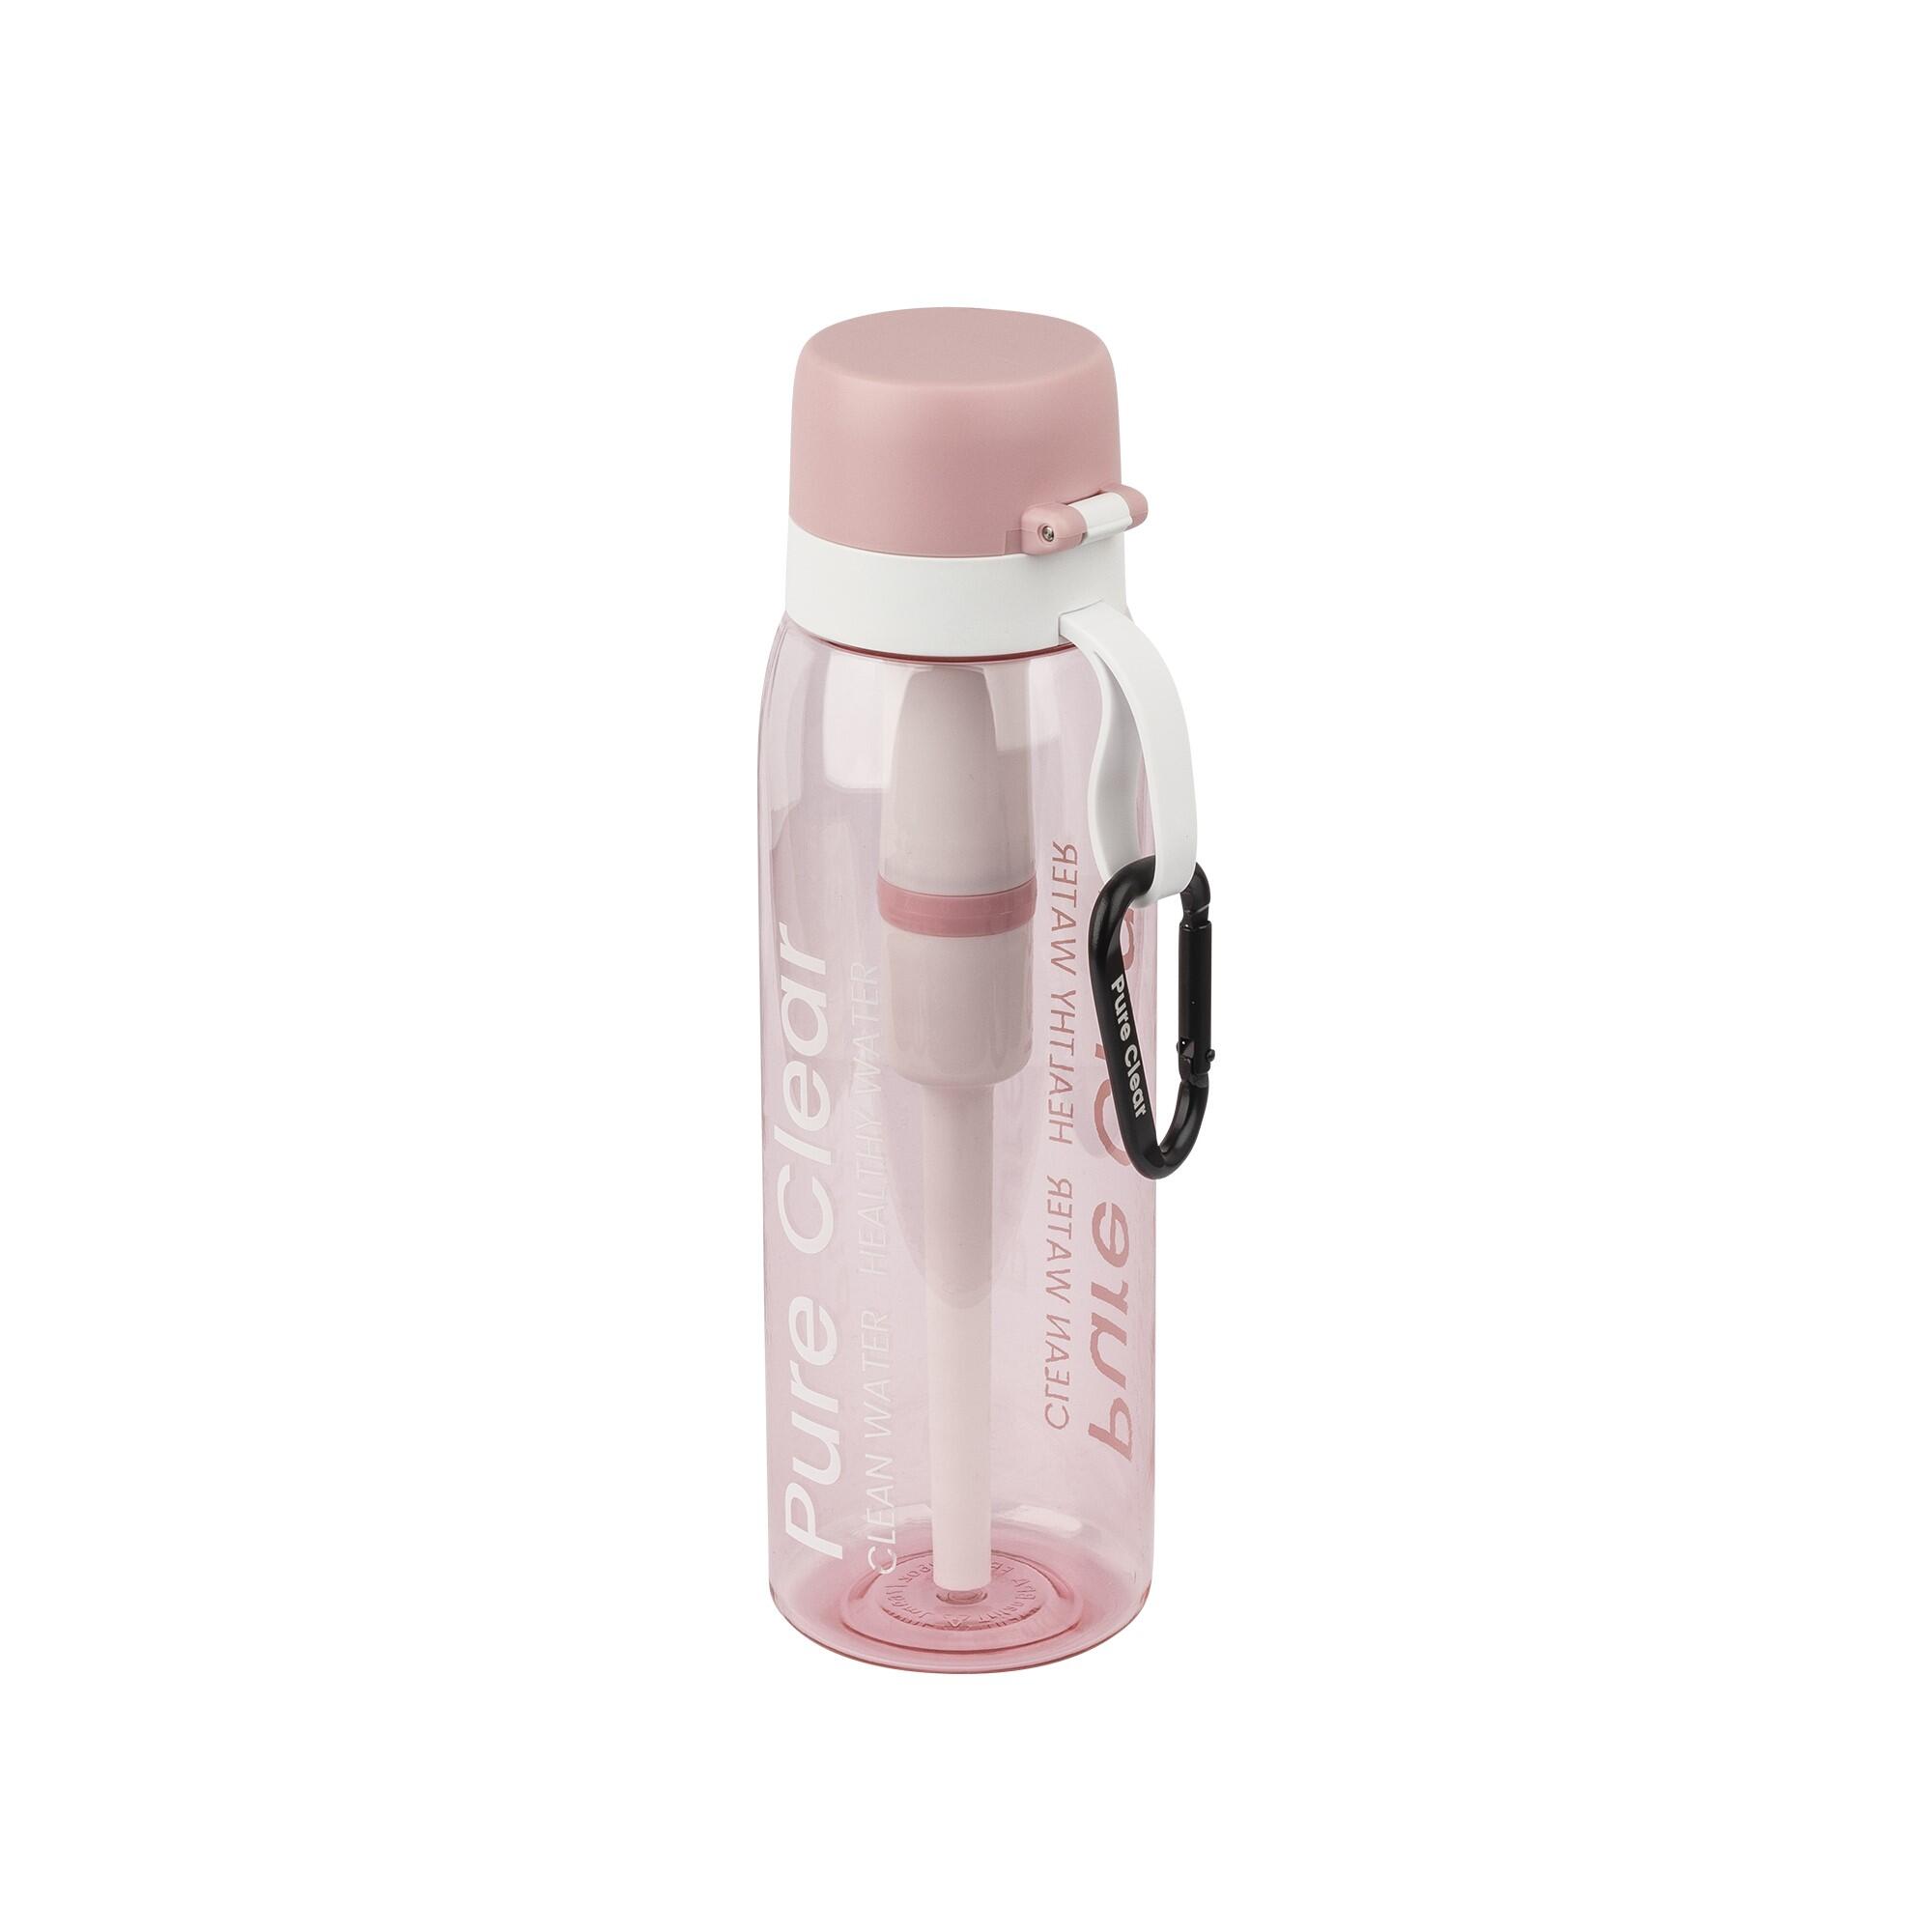 PURE CLEAR Active Water Filter Bottle - The most advanced water purifier available